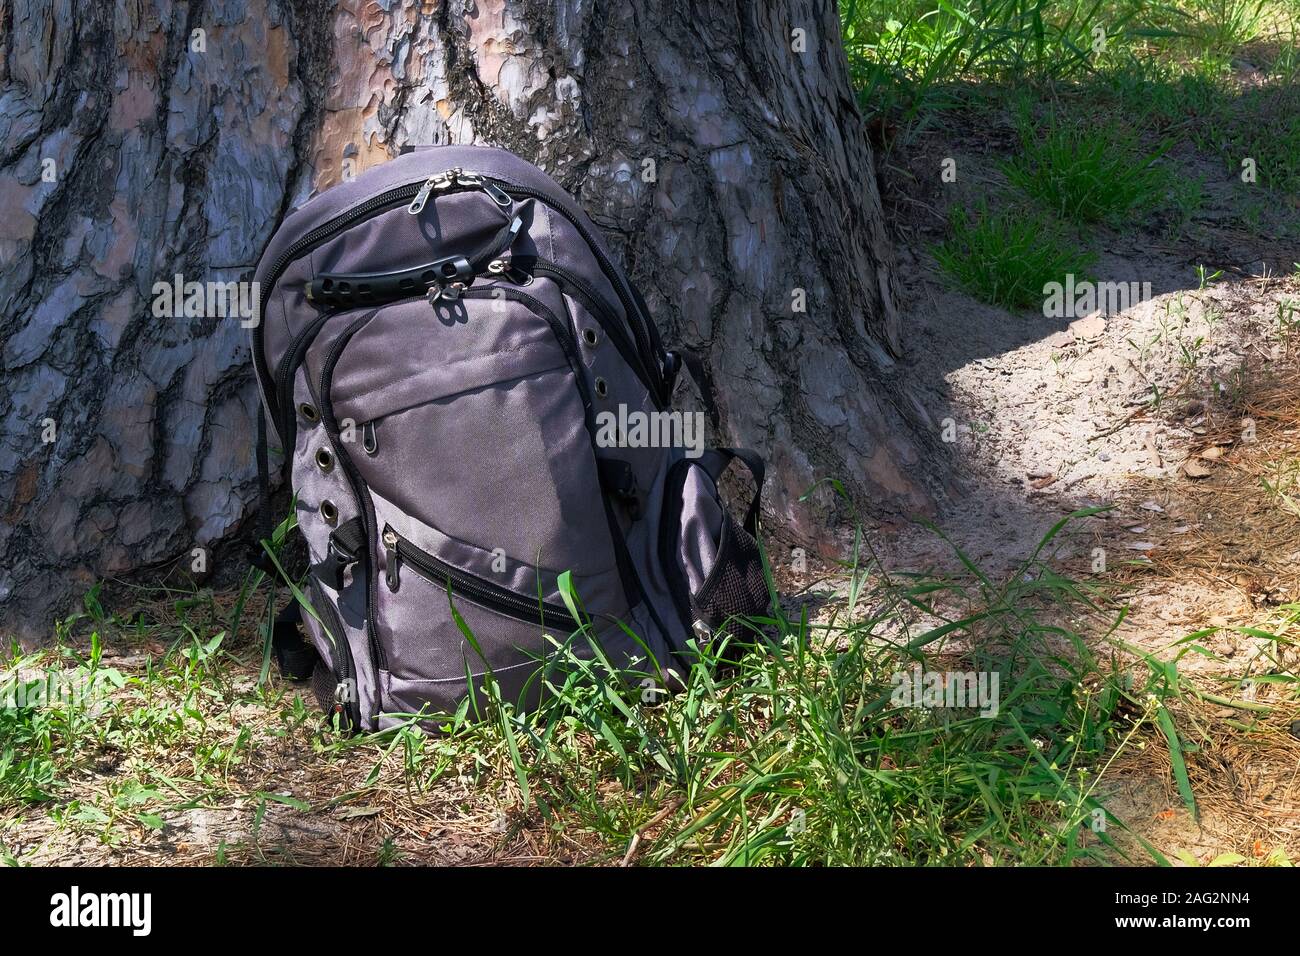 Backpack rests in pine summer forest near tree. Summer dry sunny forest. Close up view. Stock Photo